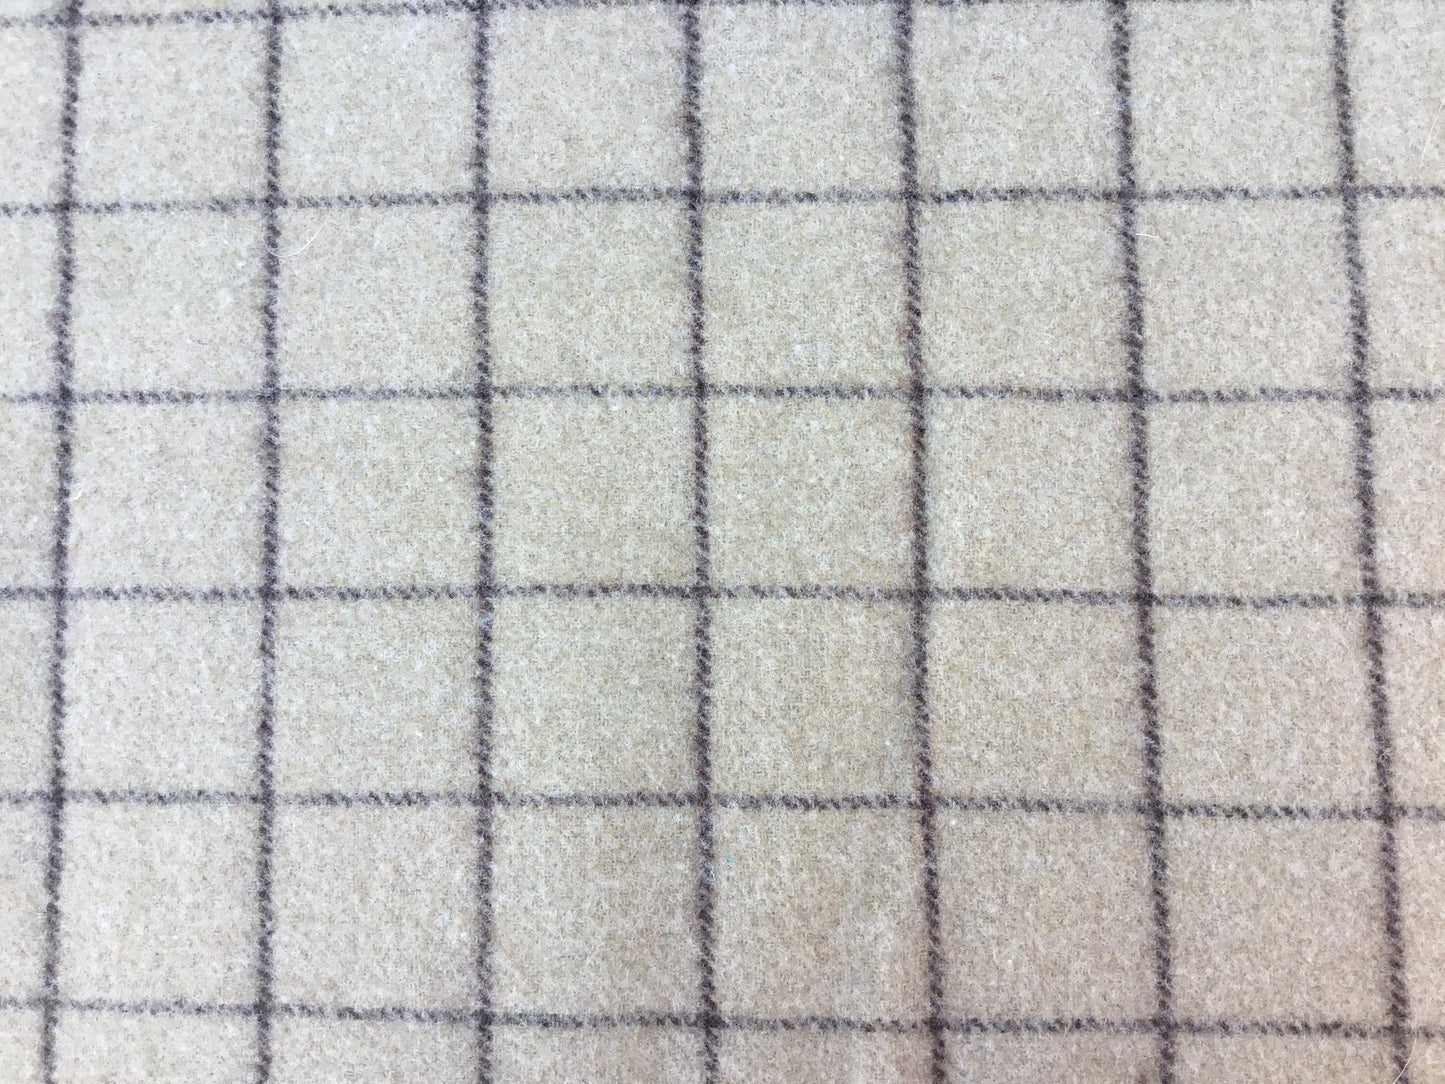 Camel Brown Check Wool Fabric 34 x 50"